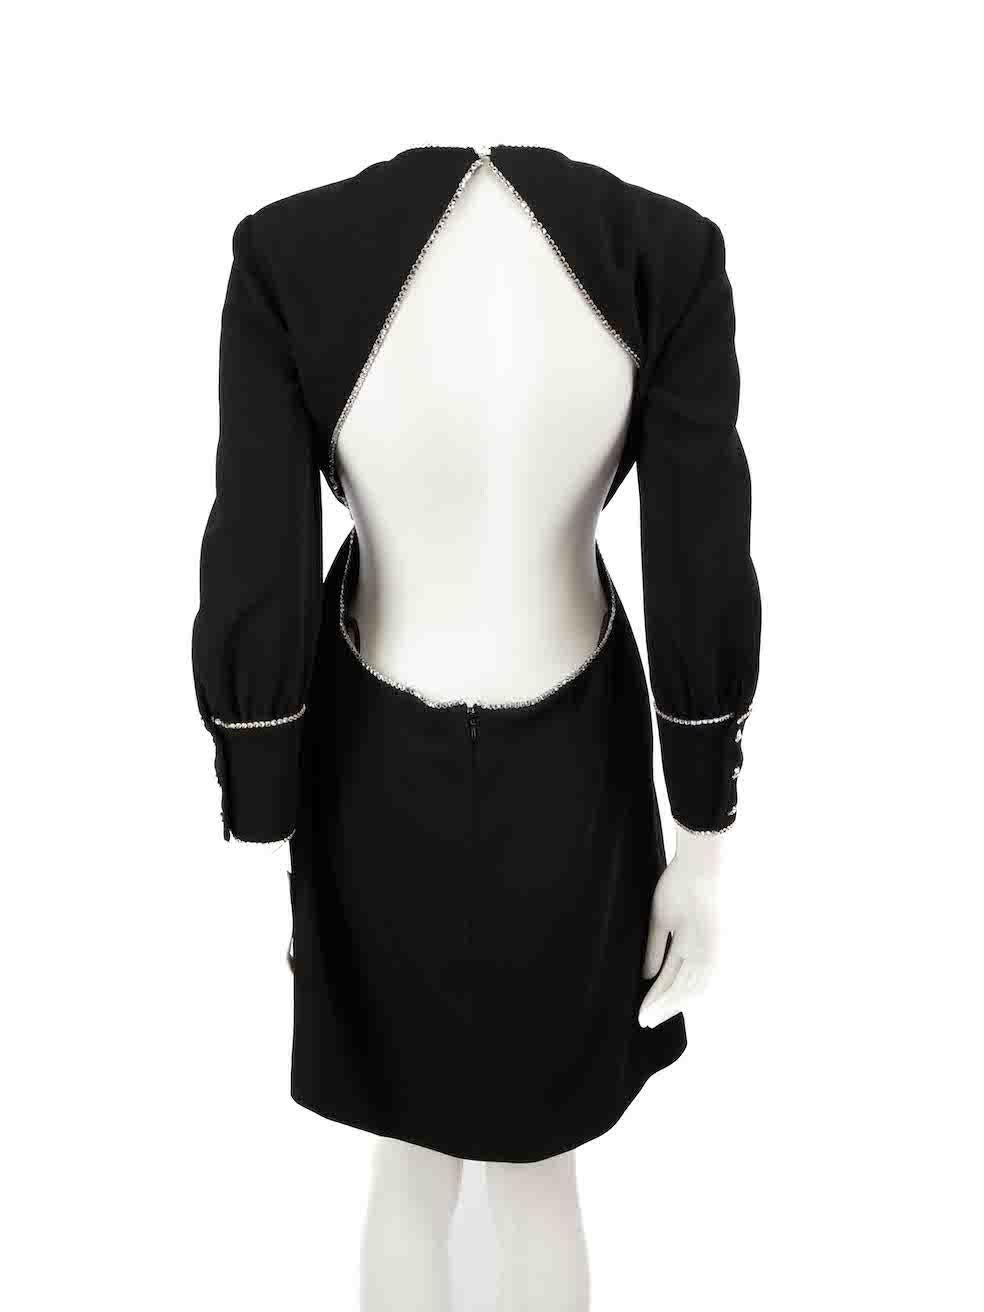 Miu Miu Black Embellished Open Back Dress Size L In Excellent Condition For Sale In London, GB